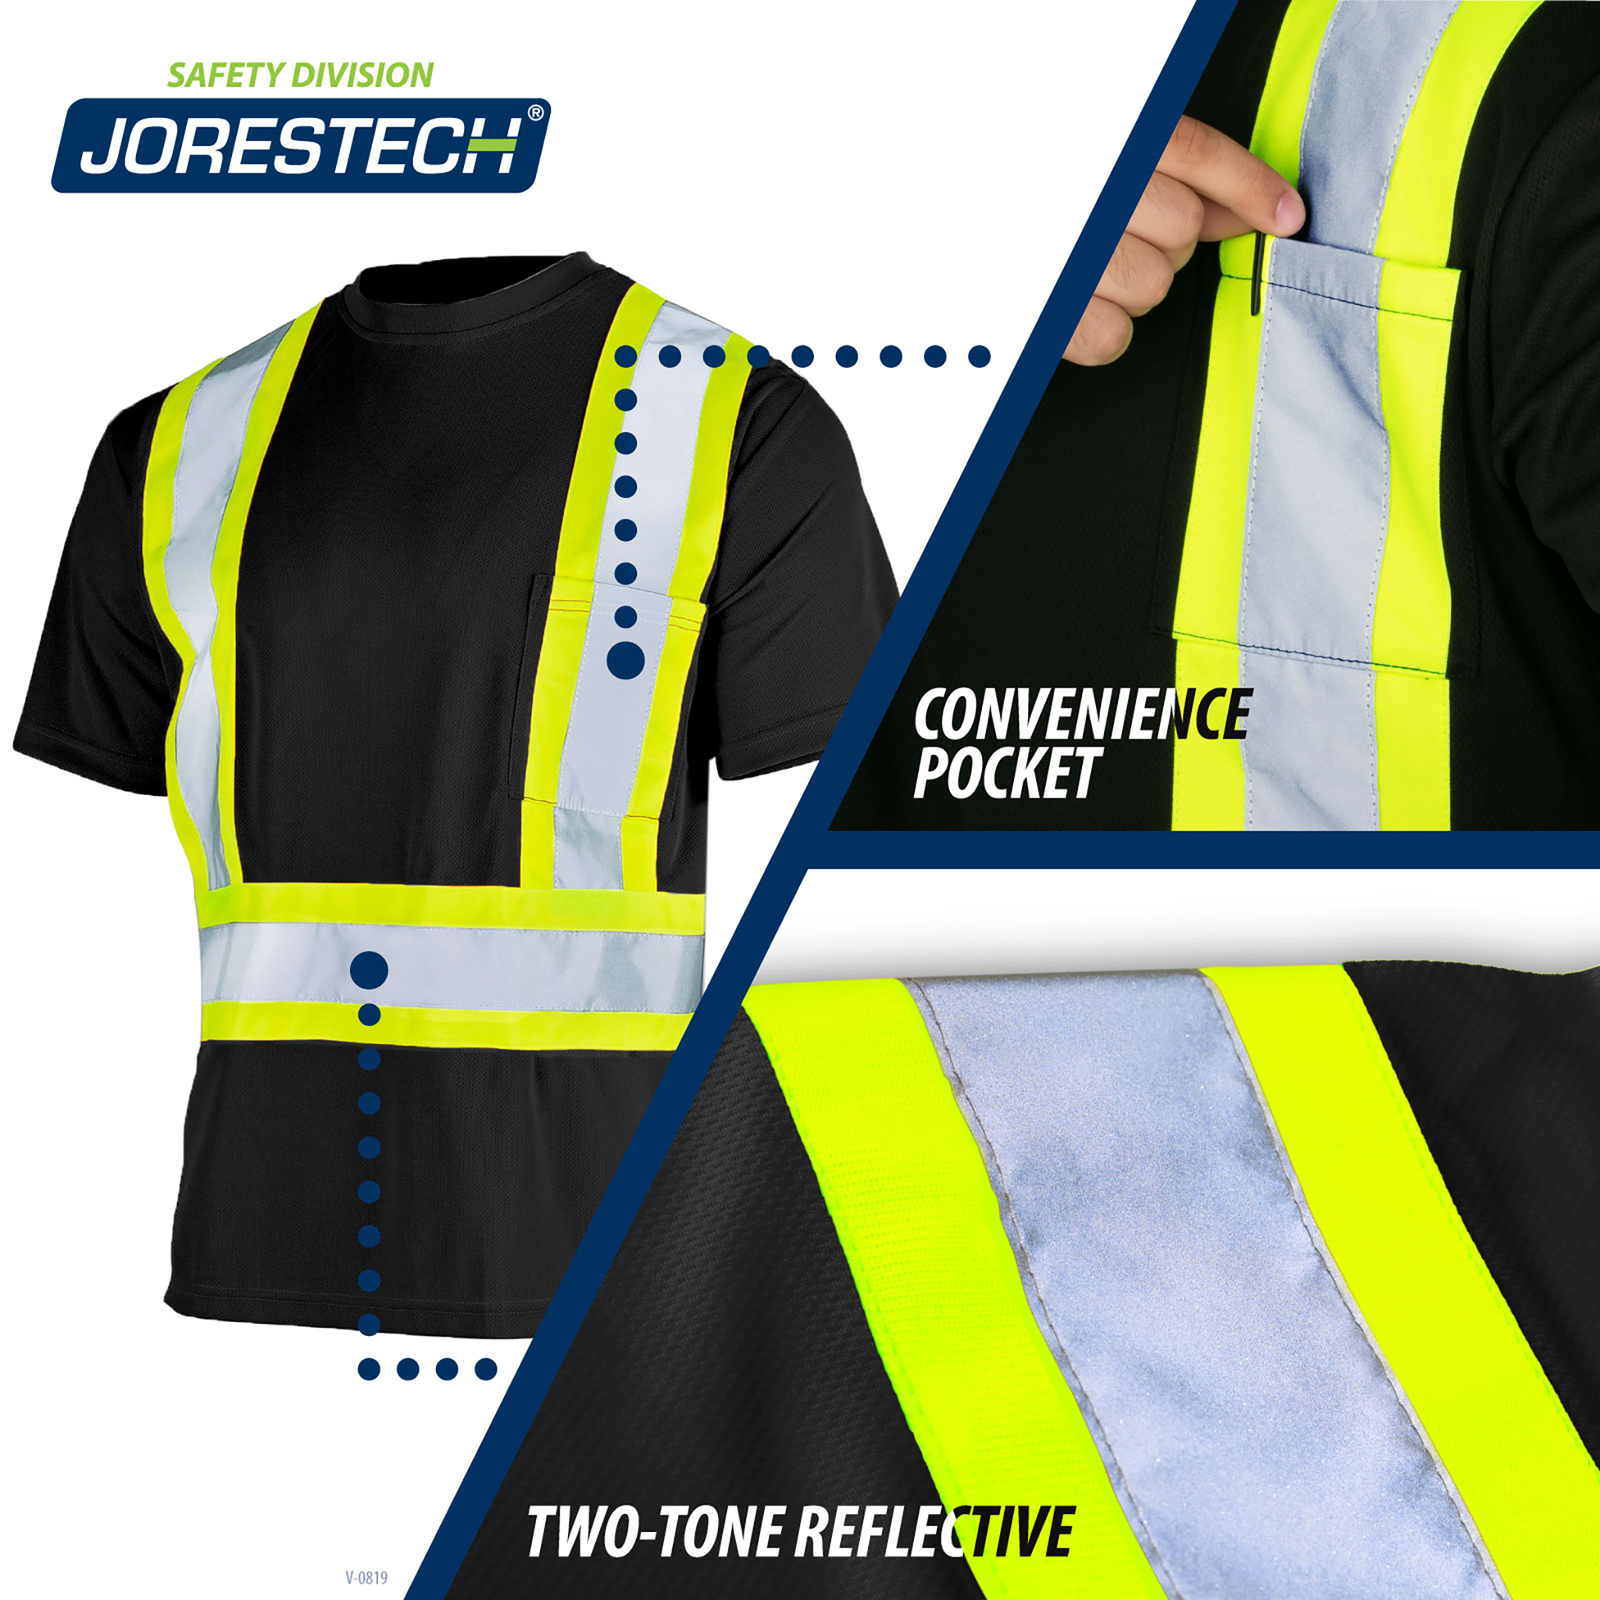 The two tone JORESTECH safety shirt is shown with 2 call outs that read: Convenience chest pocket, two tone reflective